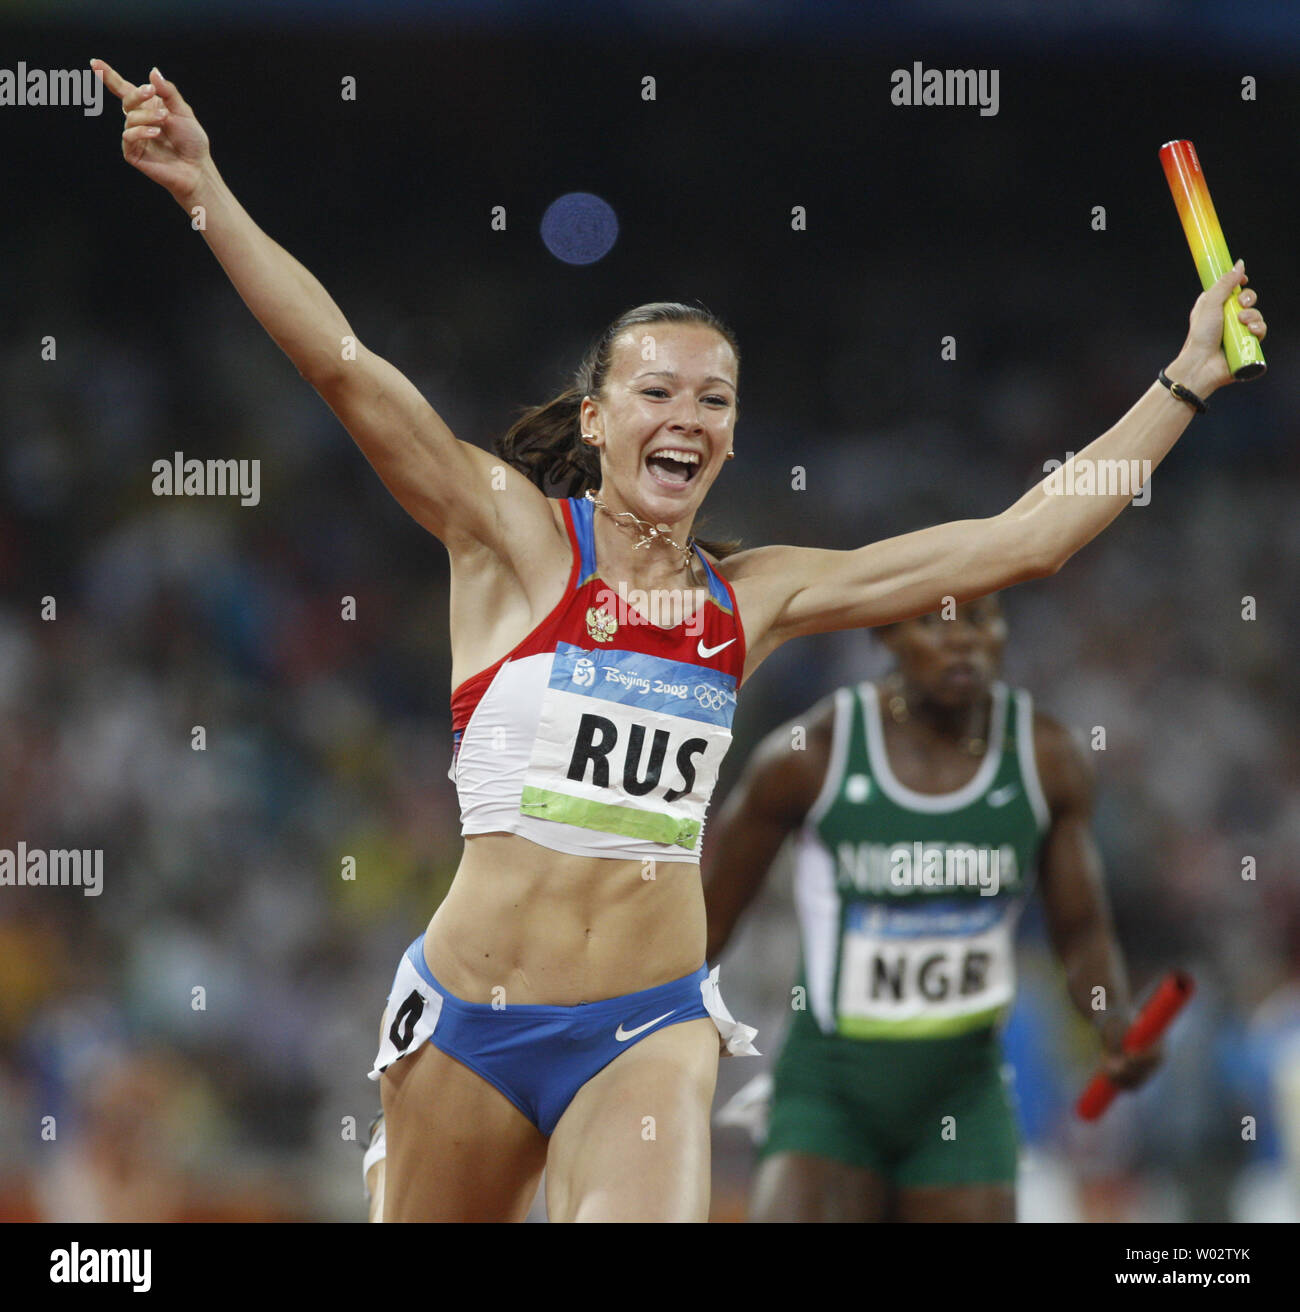 Yuliya Chermoshanskaya of Russia celebrates winning the women's 4x100m relay at the 2008 Summer Olympics in the National Stadium in Beijing on August 22, 2008. Russia won gold with a time of 42.31.    (UPI Photo/Terry Schmitt) Stock Photo